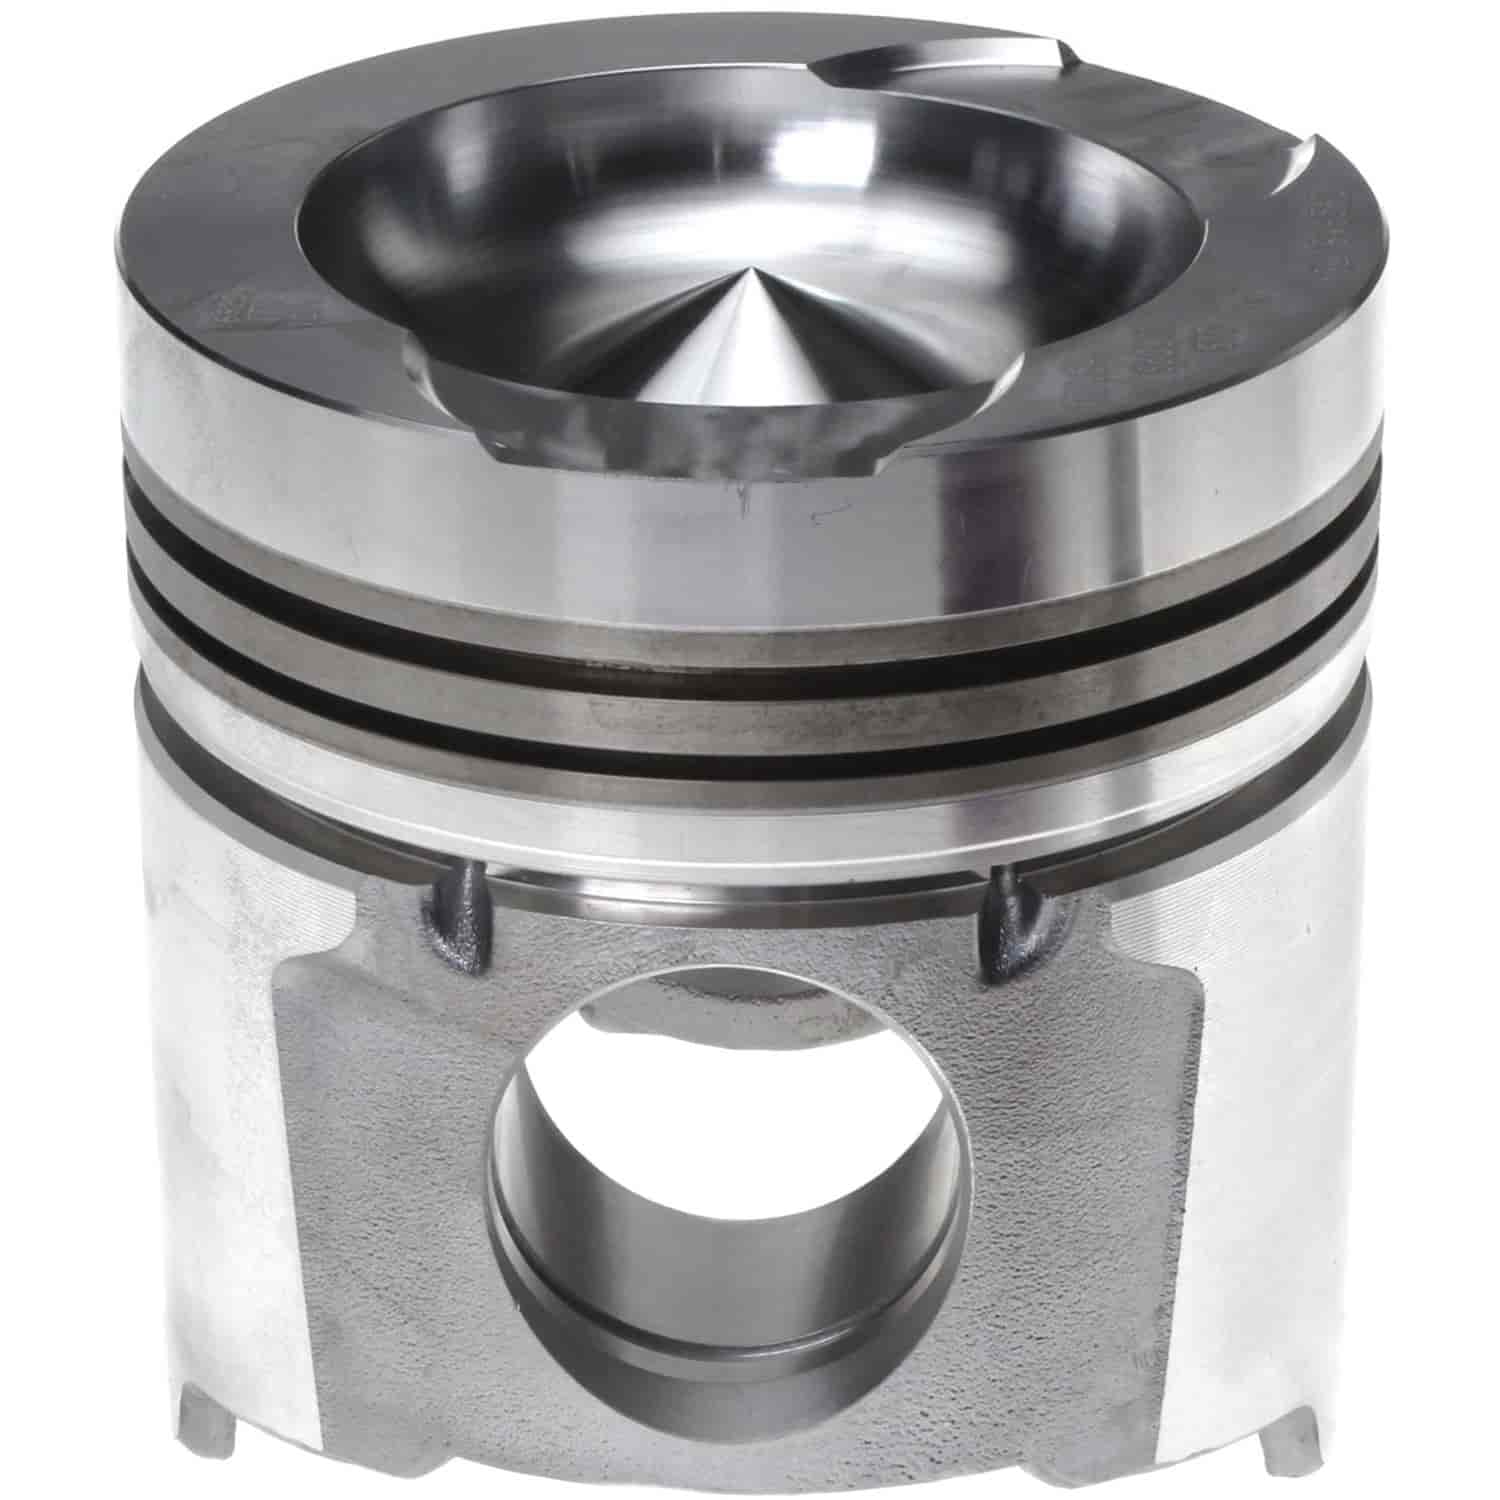 Piston Without Piston Pin Caterpillar 3304 and 3306 Engine Series with 4.750 Bore